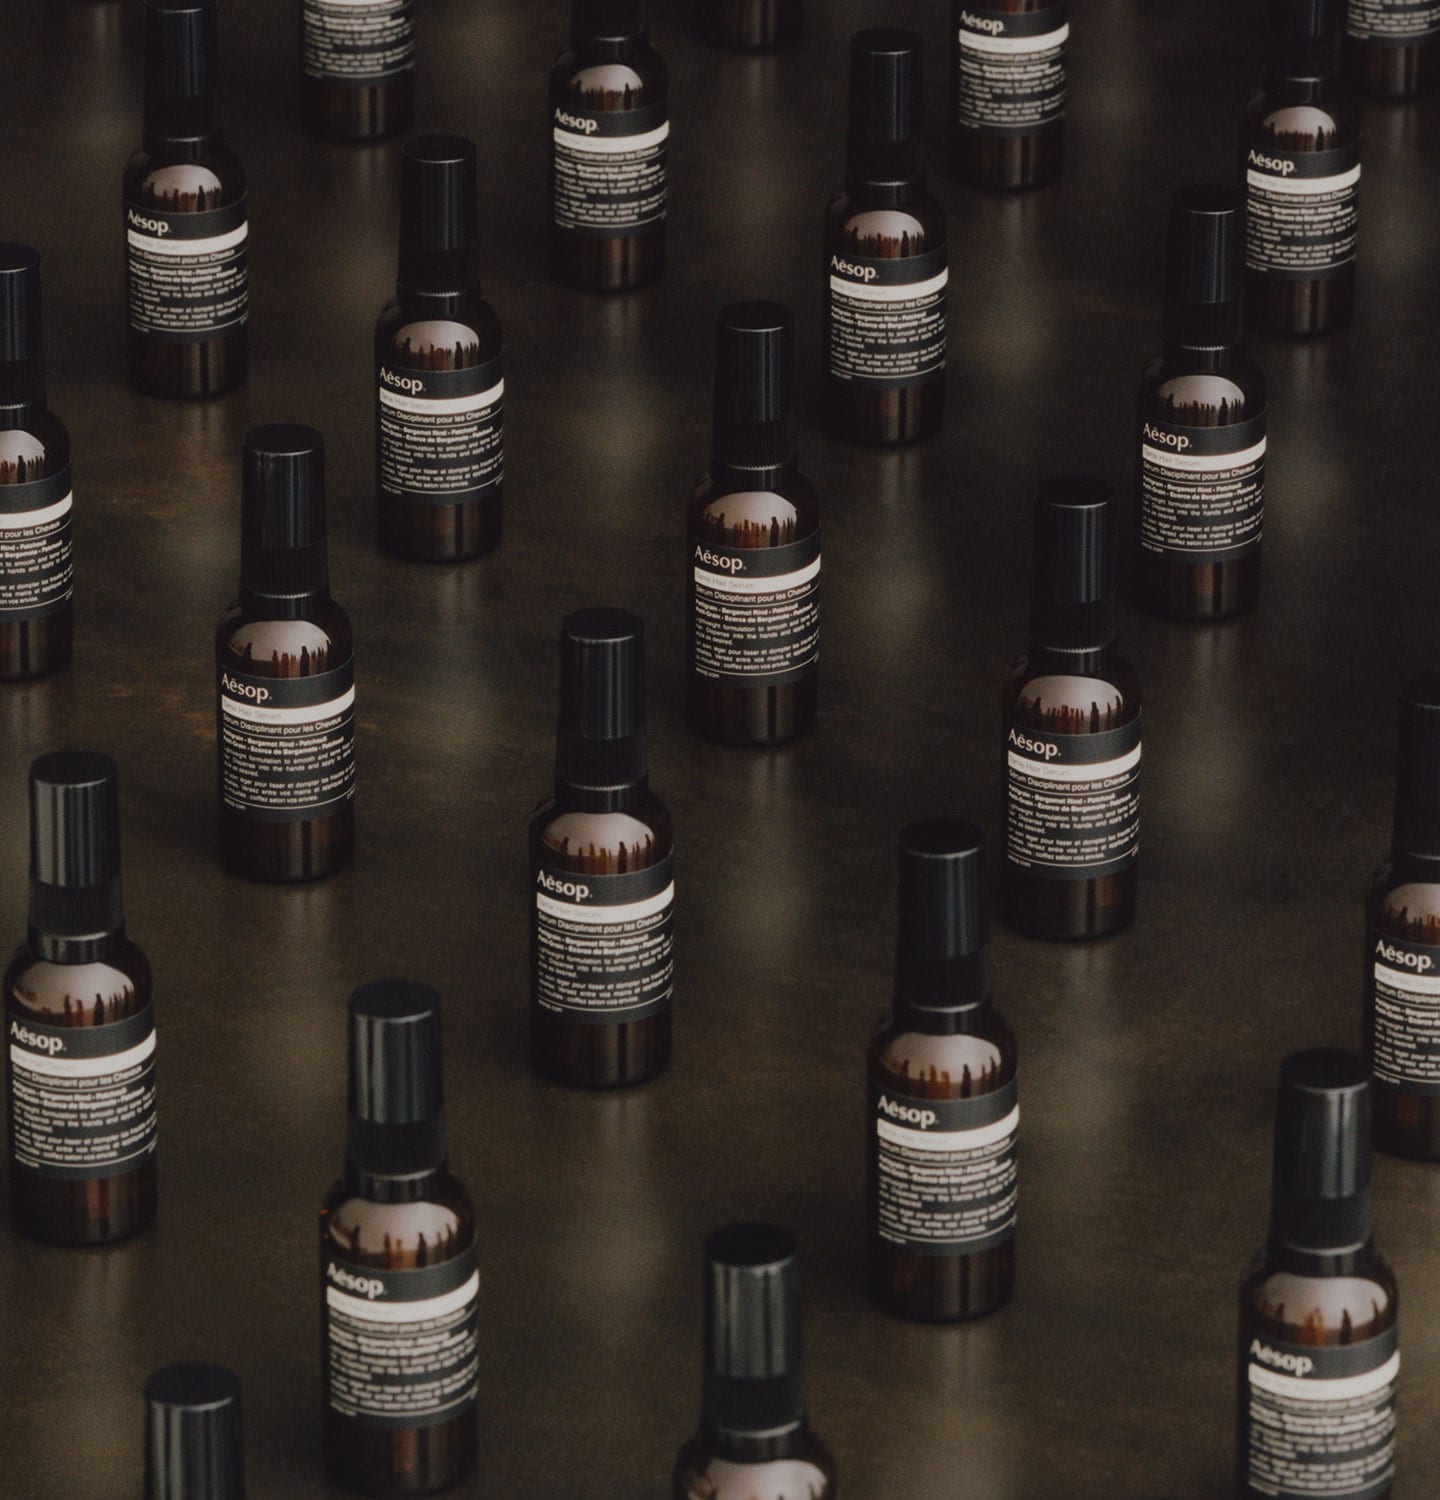 Aesop Tame Hair Serum bottles placed on a wooden surface